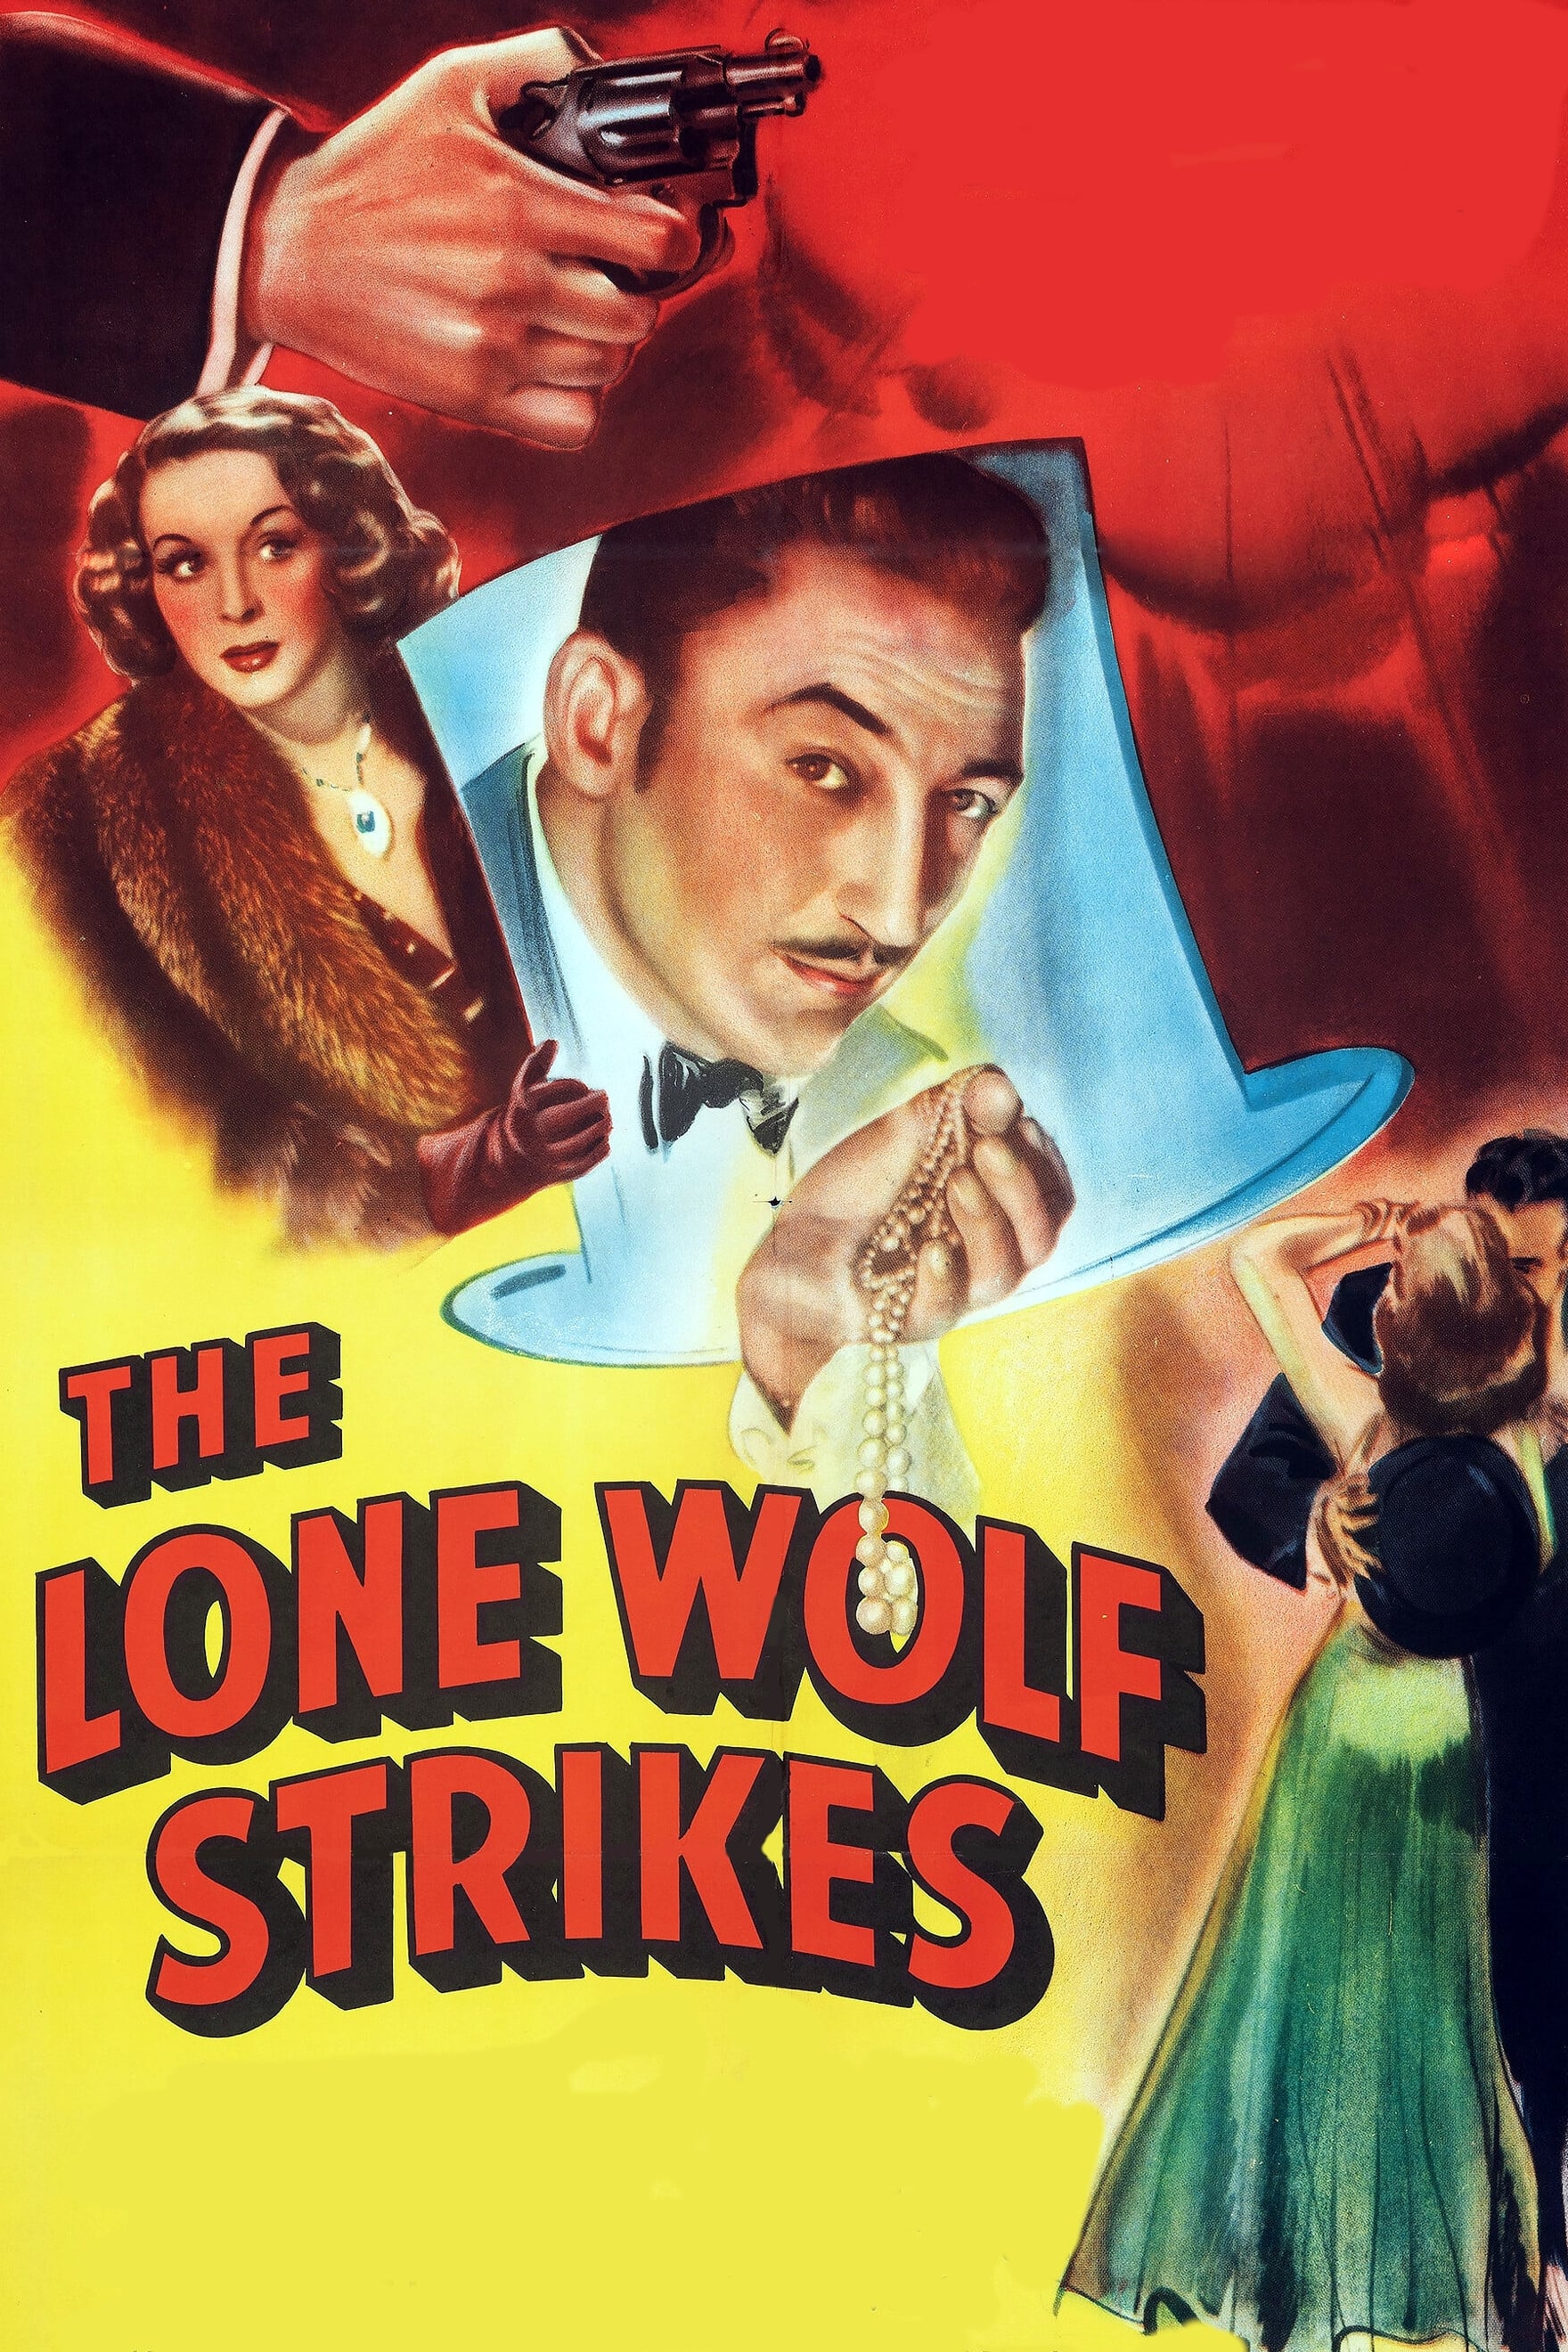 The Lone Wolf Strikes (1940)